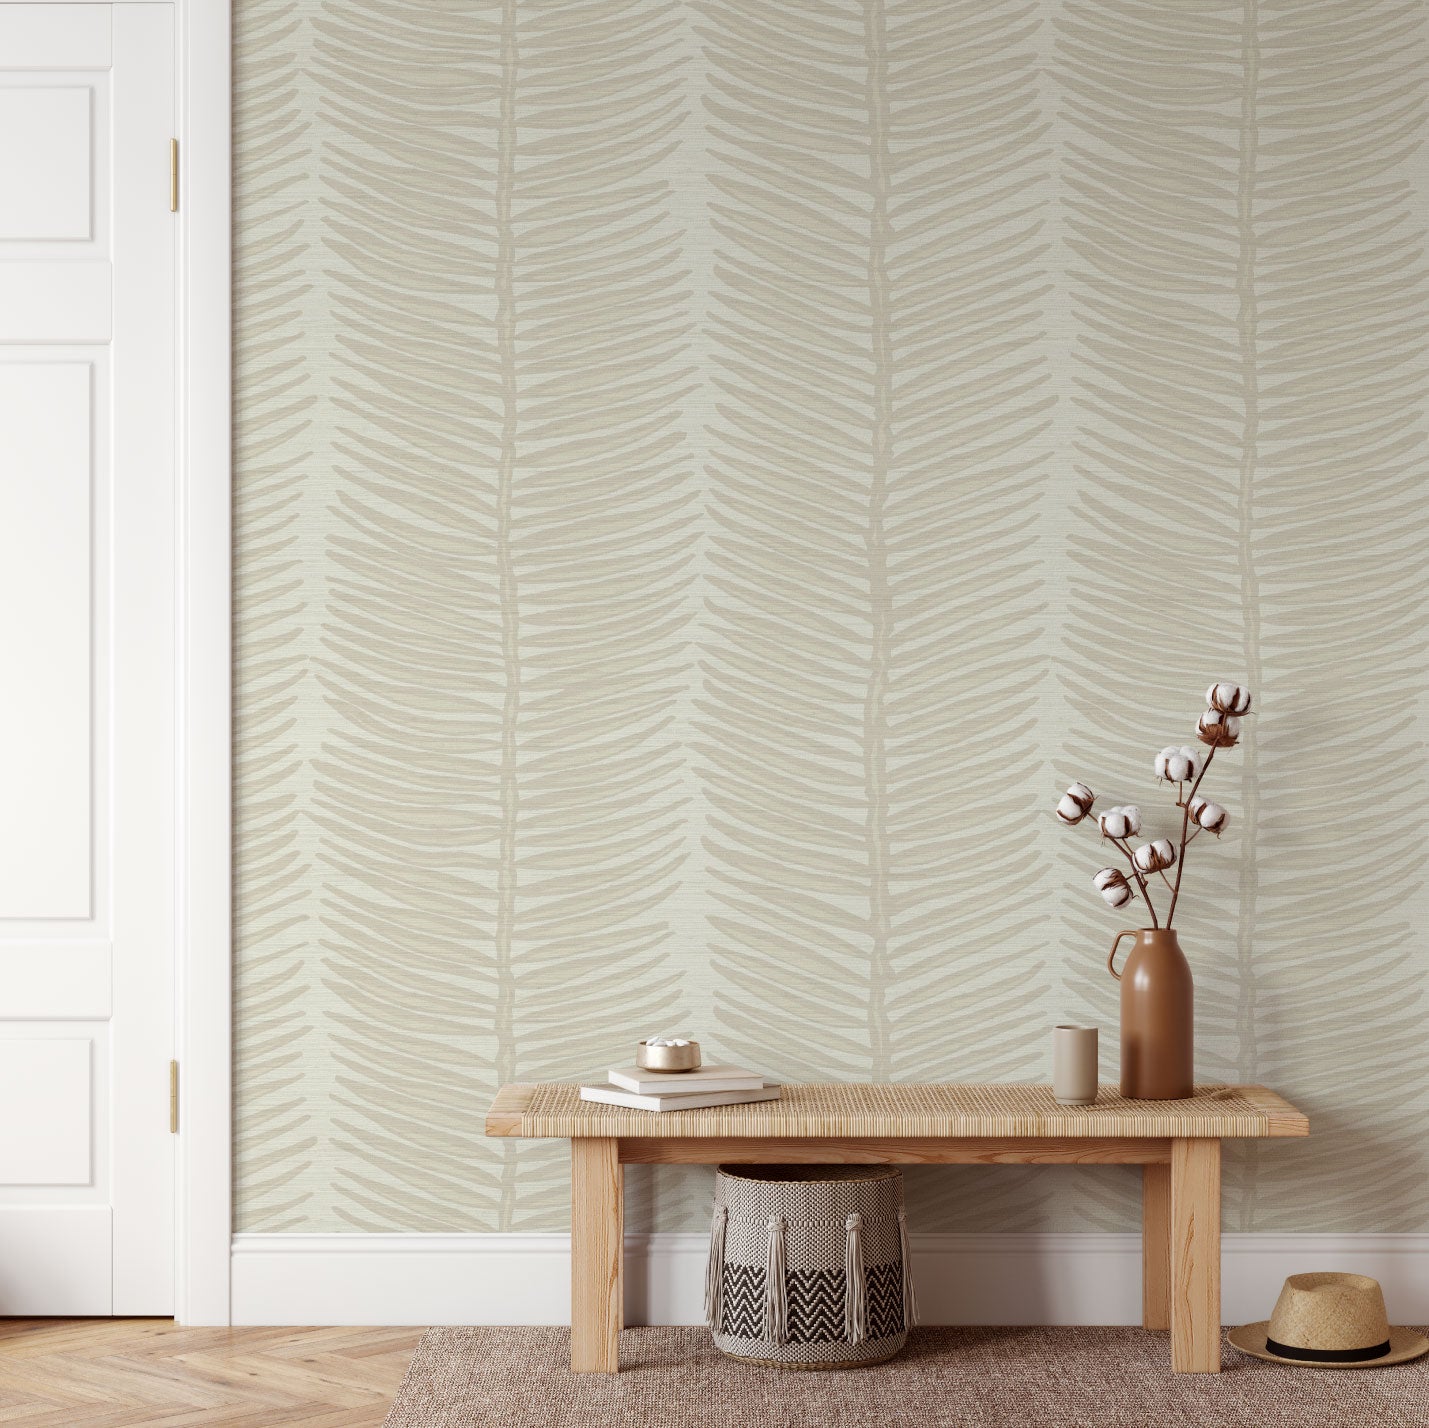 Grasscloth printed wallpaper with narrow and long wide vertical striped fern leaves with pops of color in the leaves